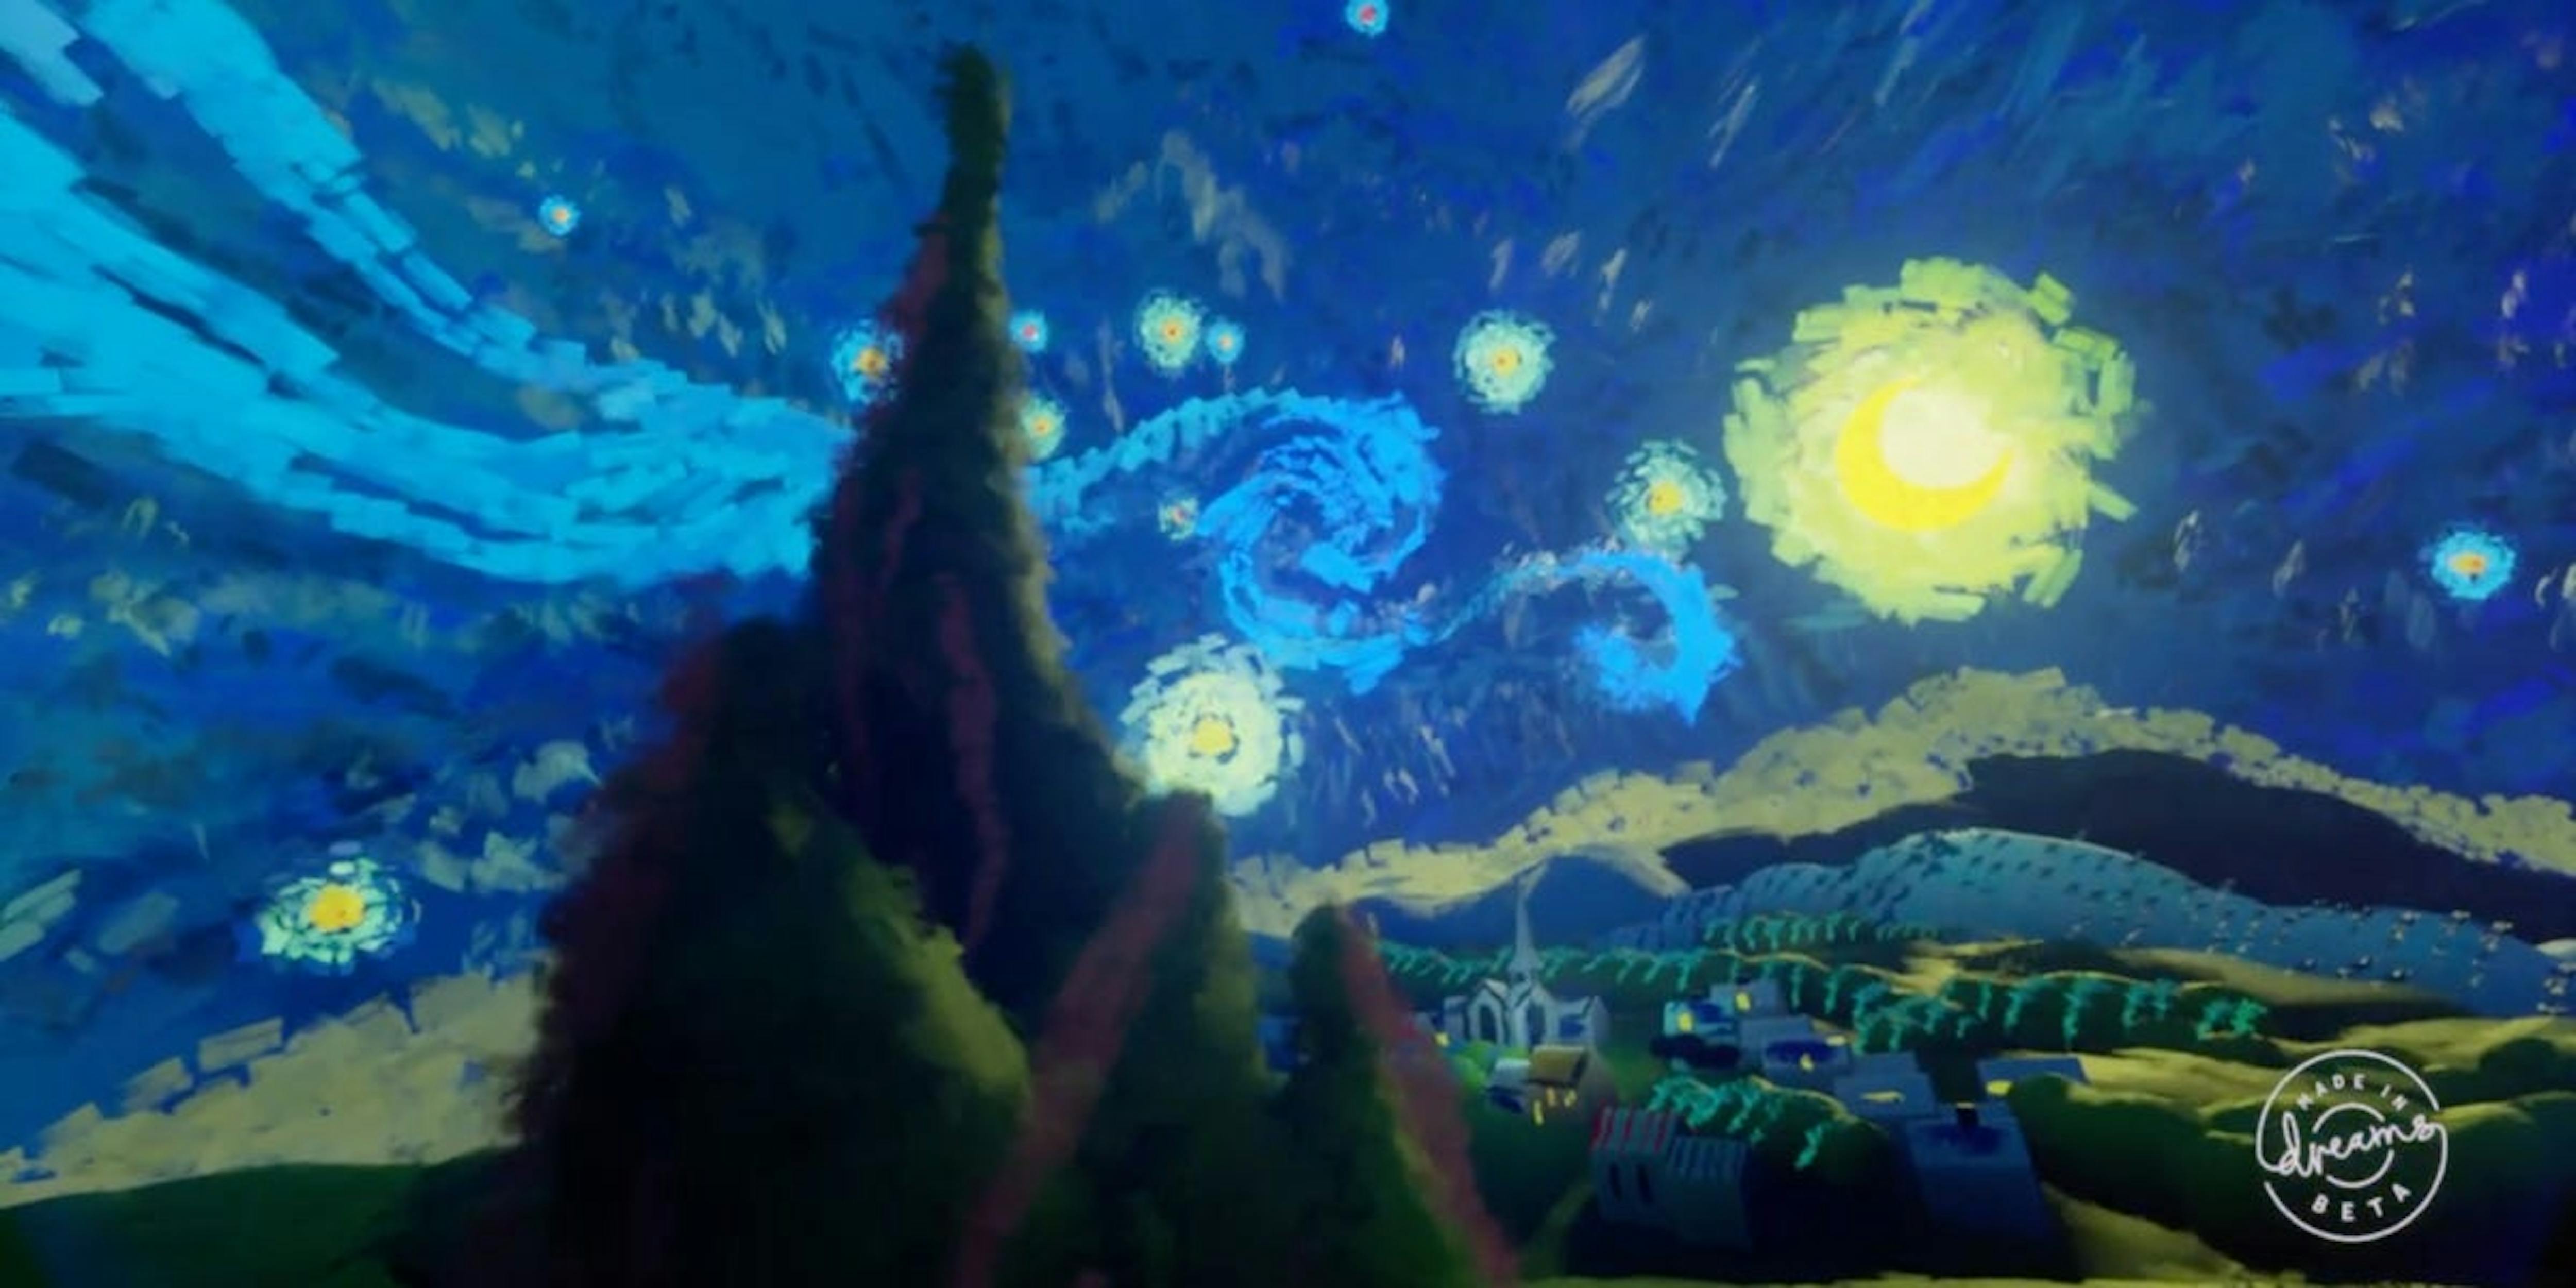 A landscape by TheOneironaut in the video game Dreams, designed to resemble Van Gogh's The Starry Night.